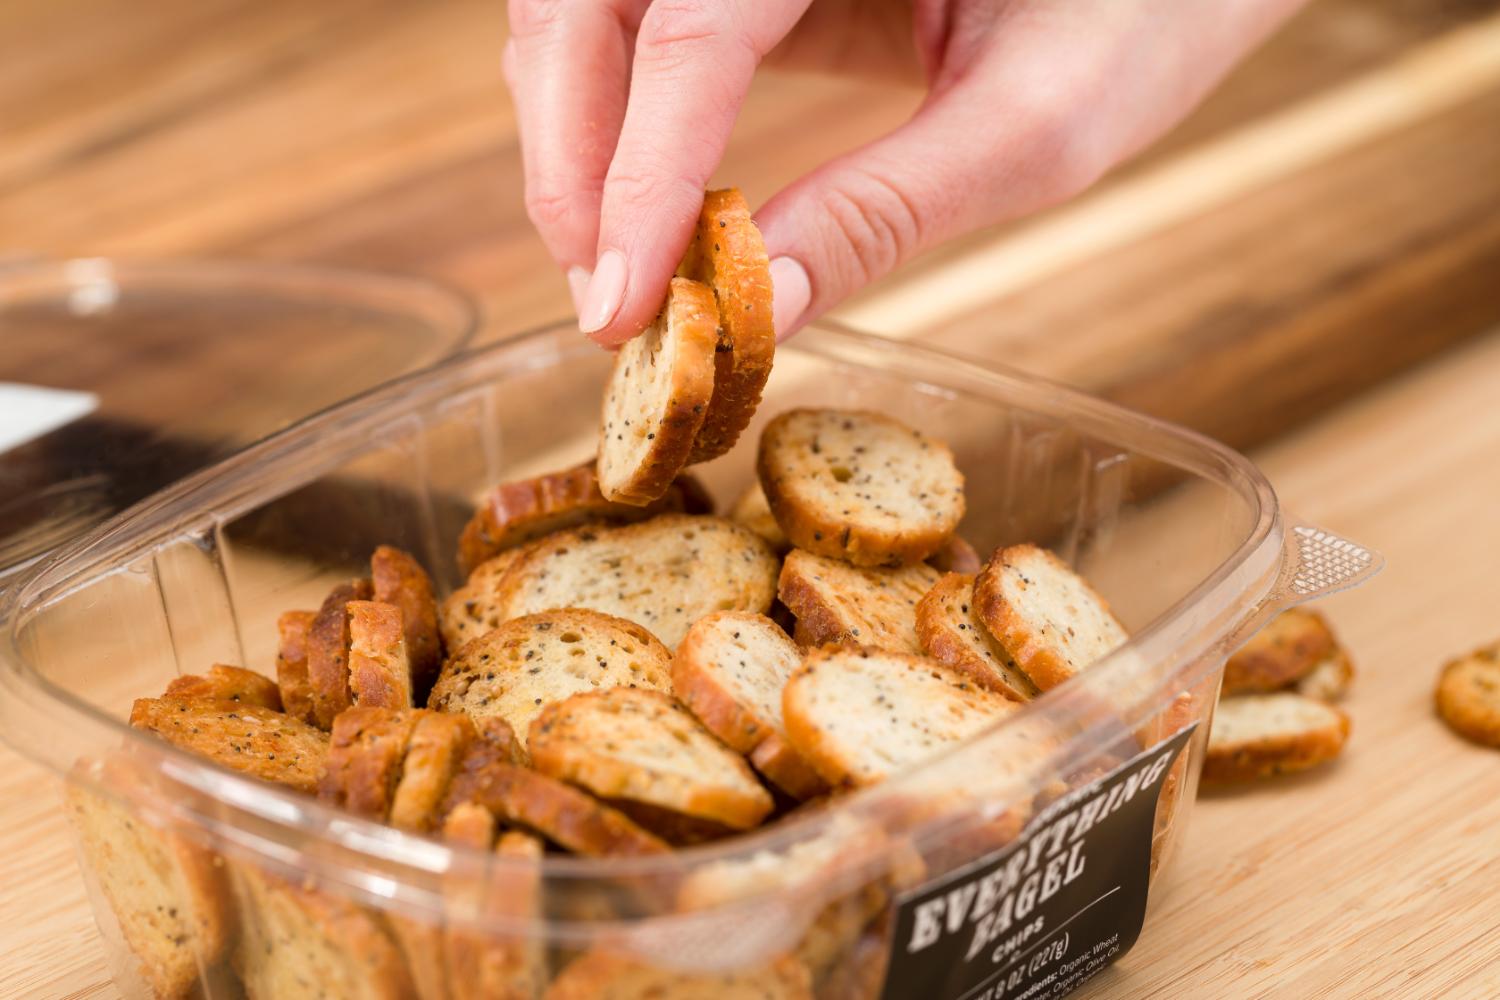 Everything Bagel Chips being grabbed out of its container